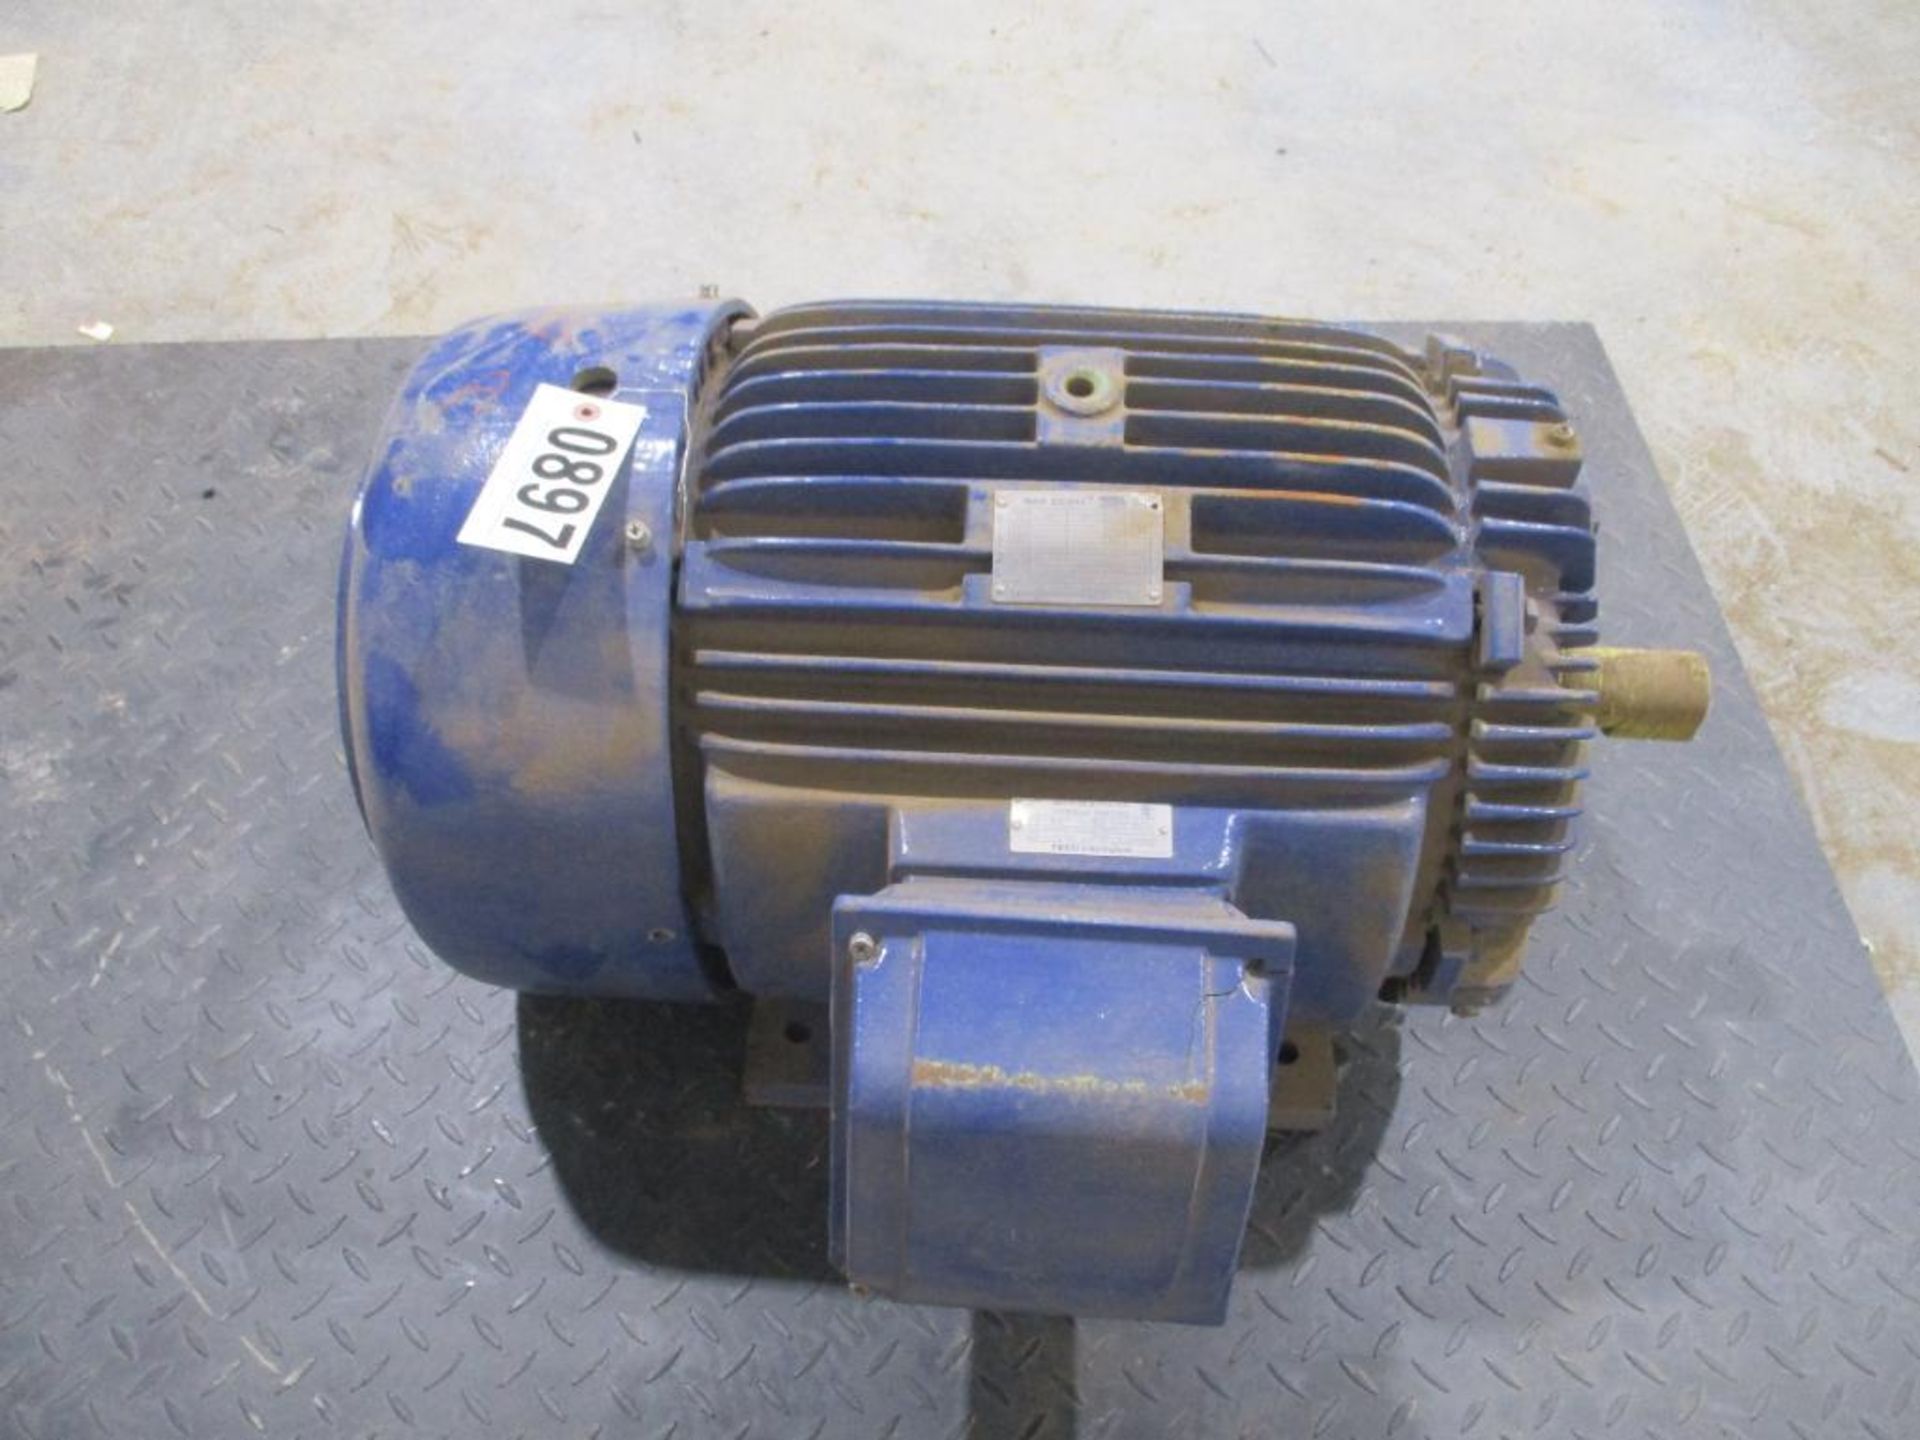 WESTINGHOUSE 3 PHASE 50HP 3550RPM 326TS FRAME A/C MOTOR P/N HB0502, 692# lbs (There will be a $40 Ri